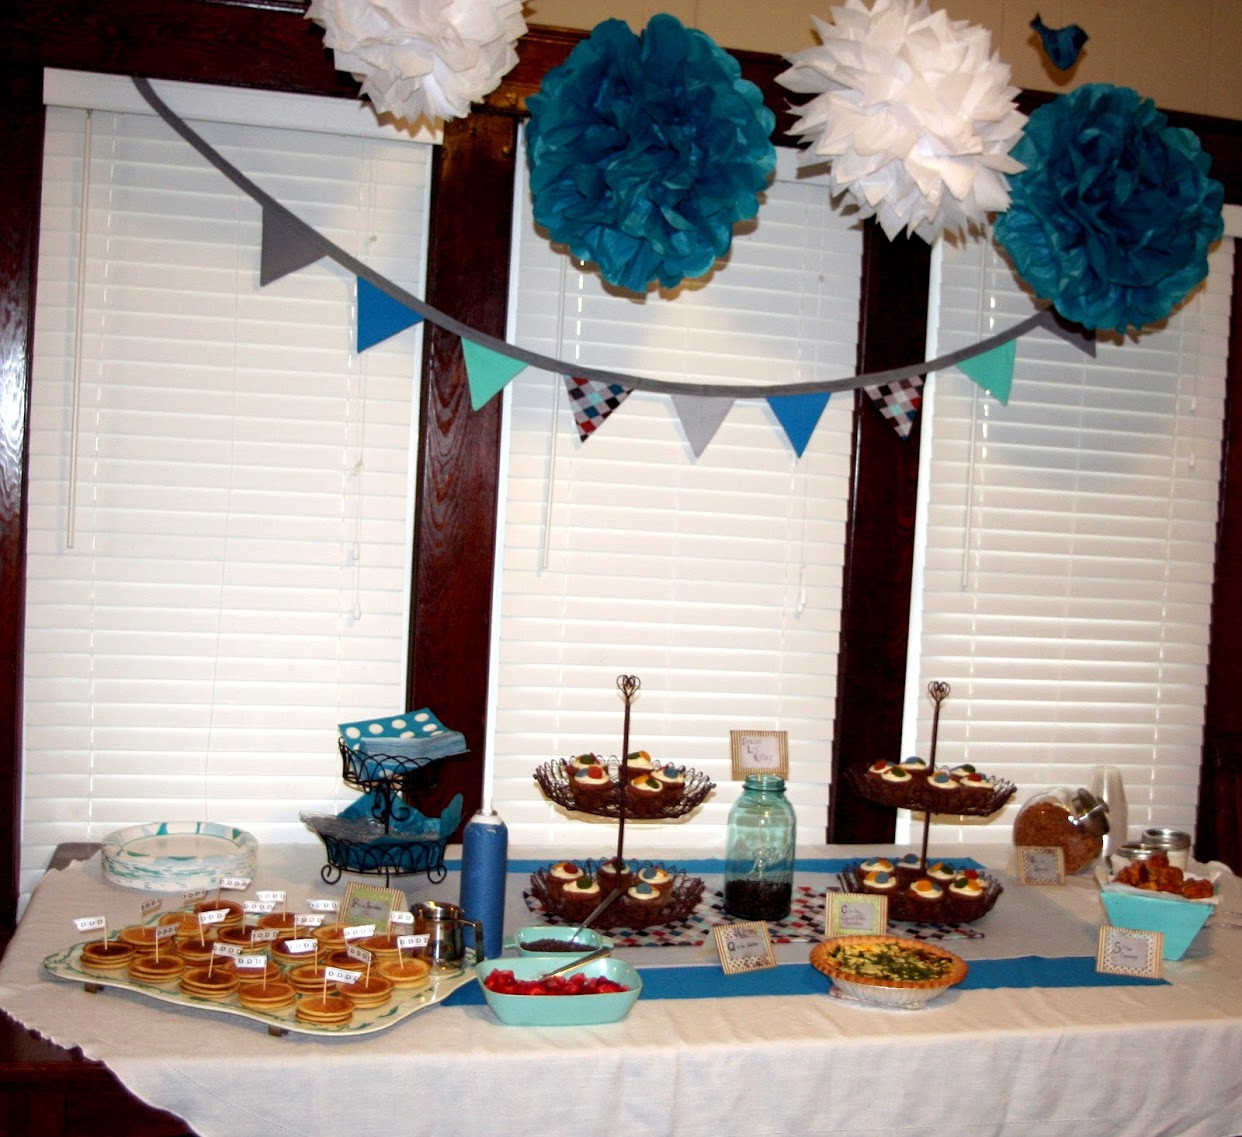 Decor Ideas For Baby Shower
 Baby Shower Decorations For Boys Ideas